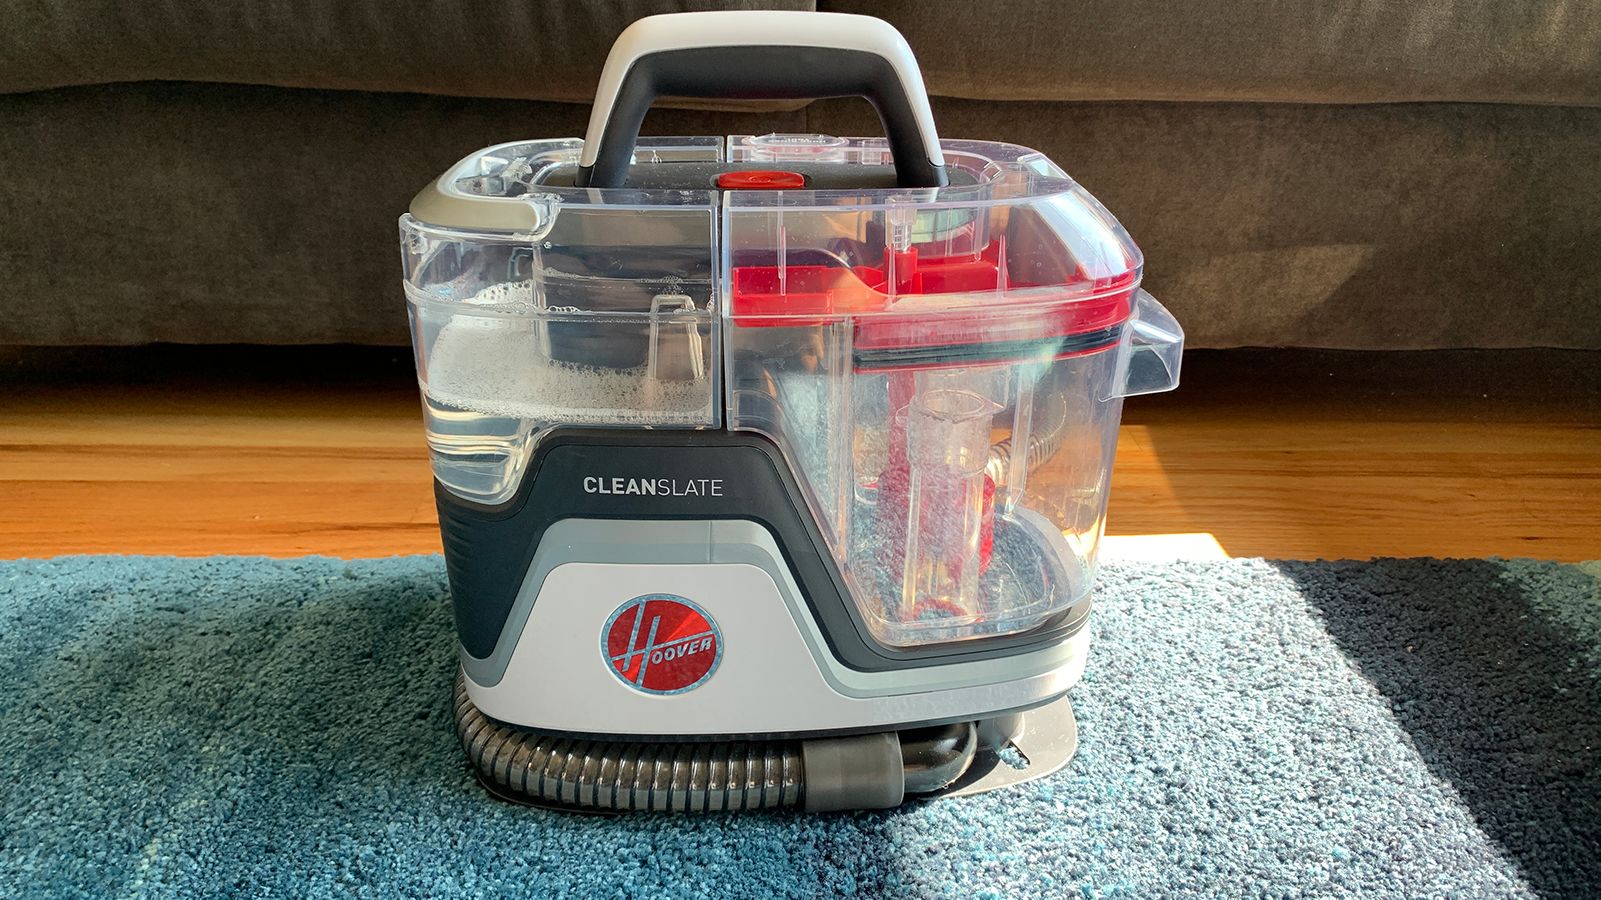 How to use a steam cleaner on rugs, upholstery and more